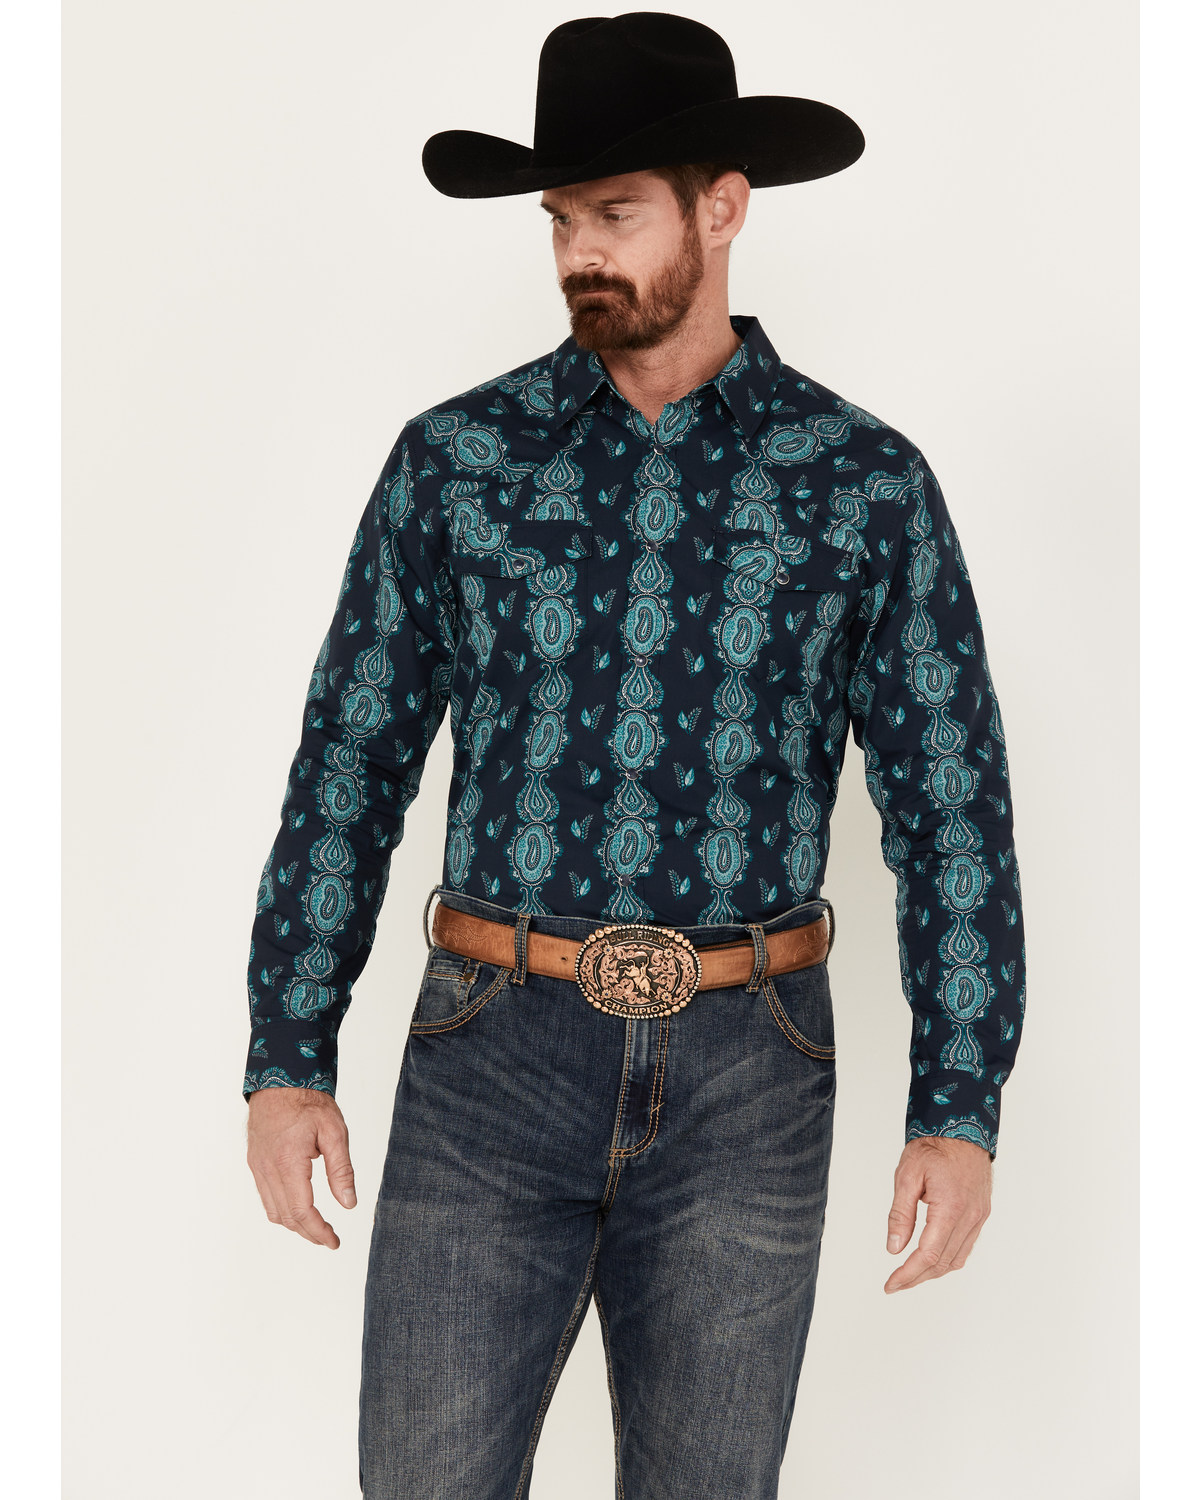 Gibson Trading Co Men's Take It Easy Long Sleeve Snap Western Shirt